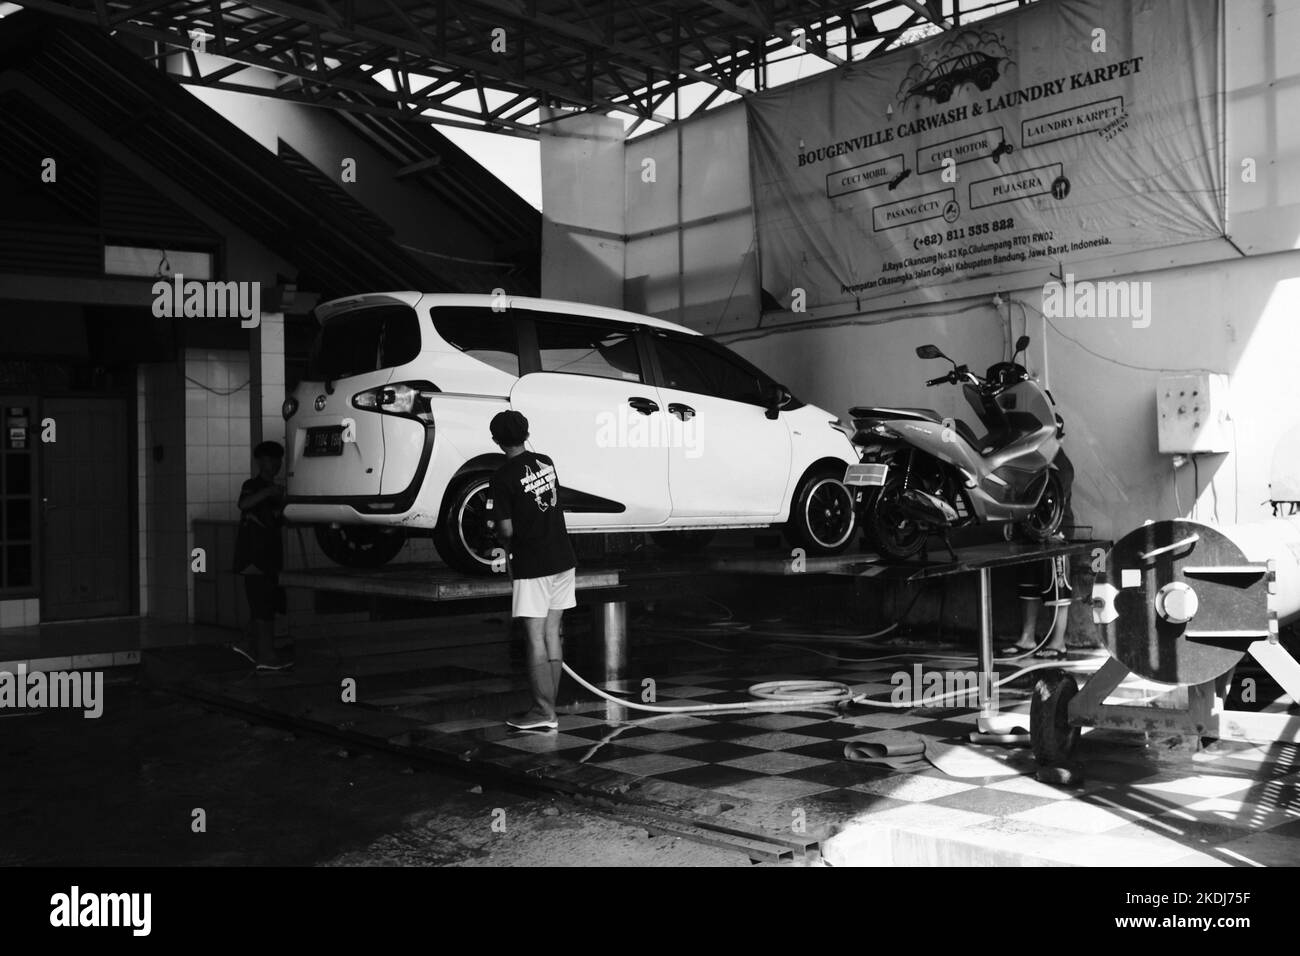 Cikancung, West Java, Indonesia - 24 October, 2022 : Black and white photo, Monochrome photo of a car wash process Stock Photo